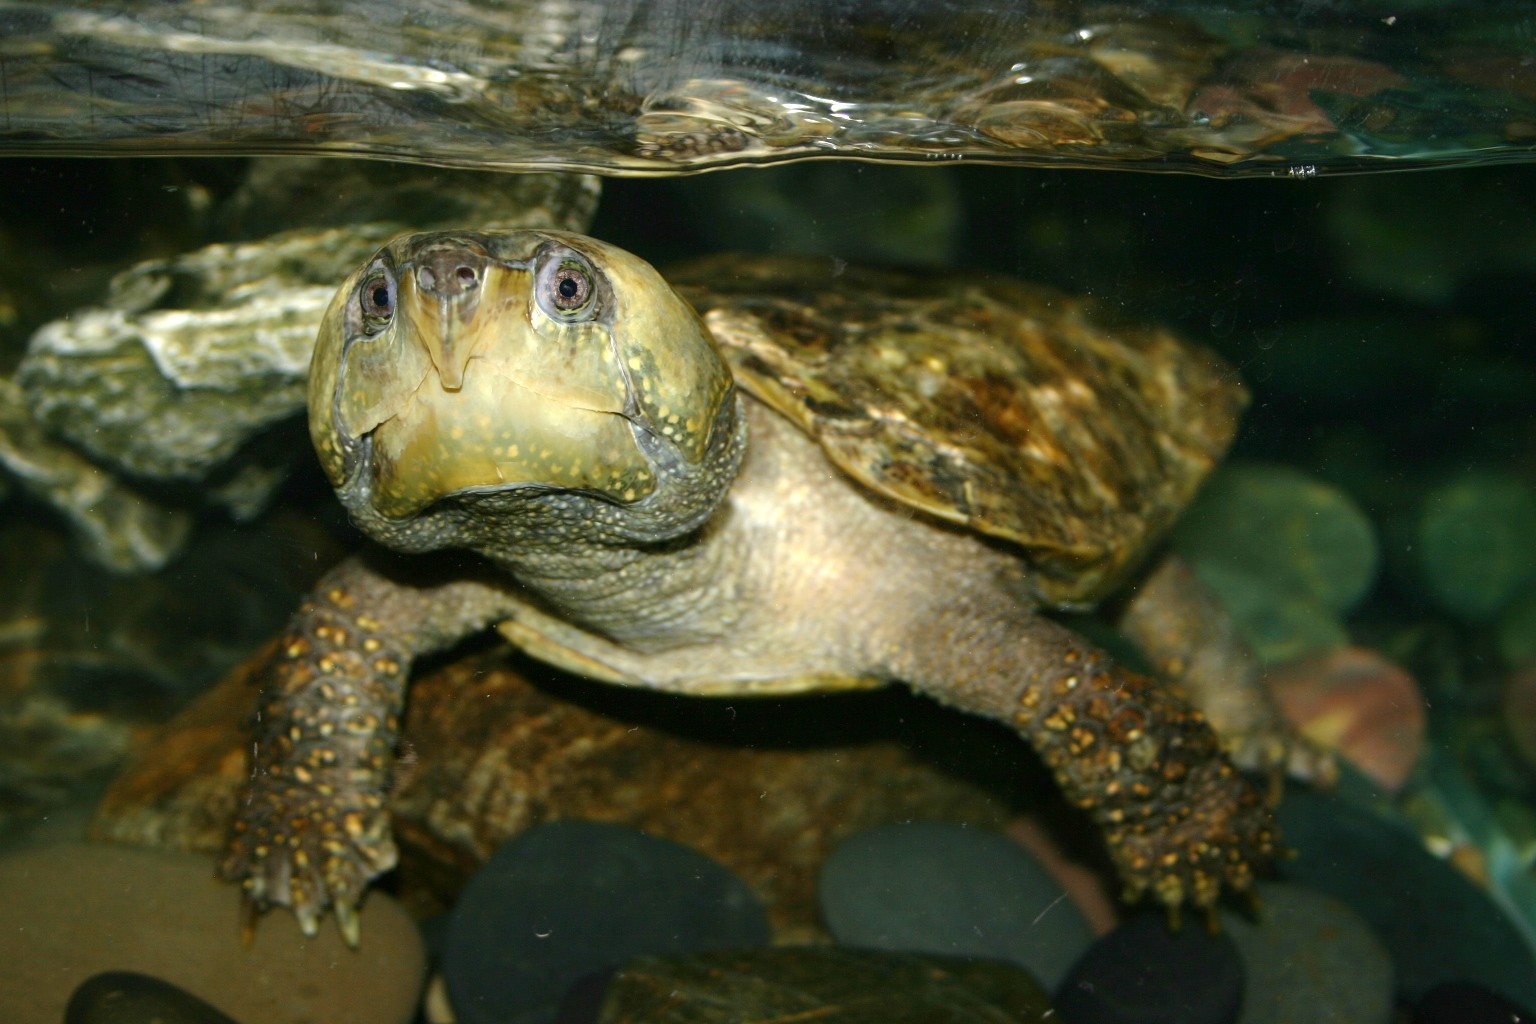 All in a day's work: 2011 is the Year of the Turtle